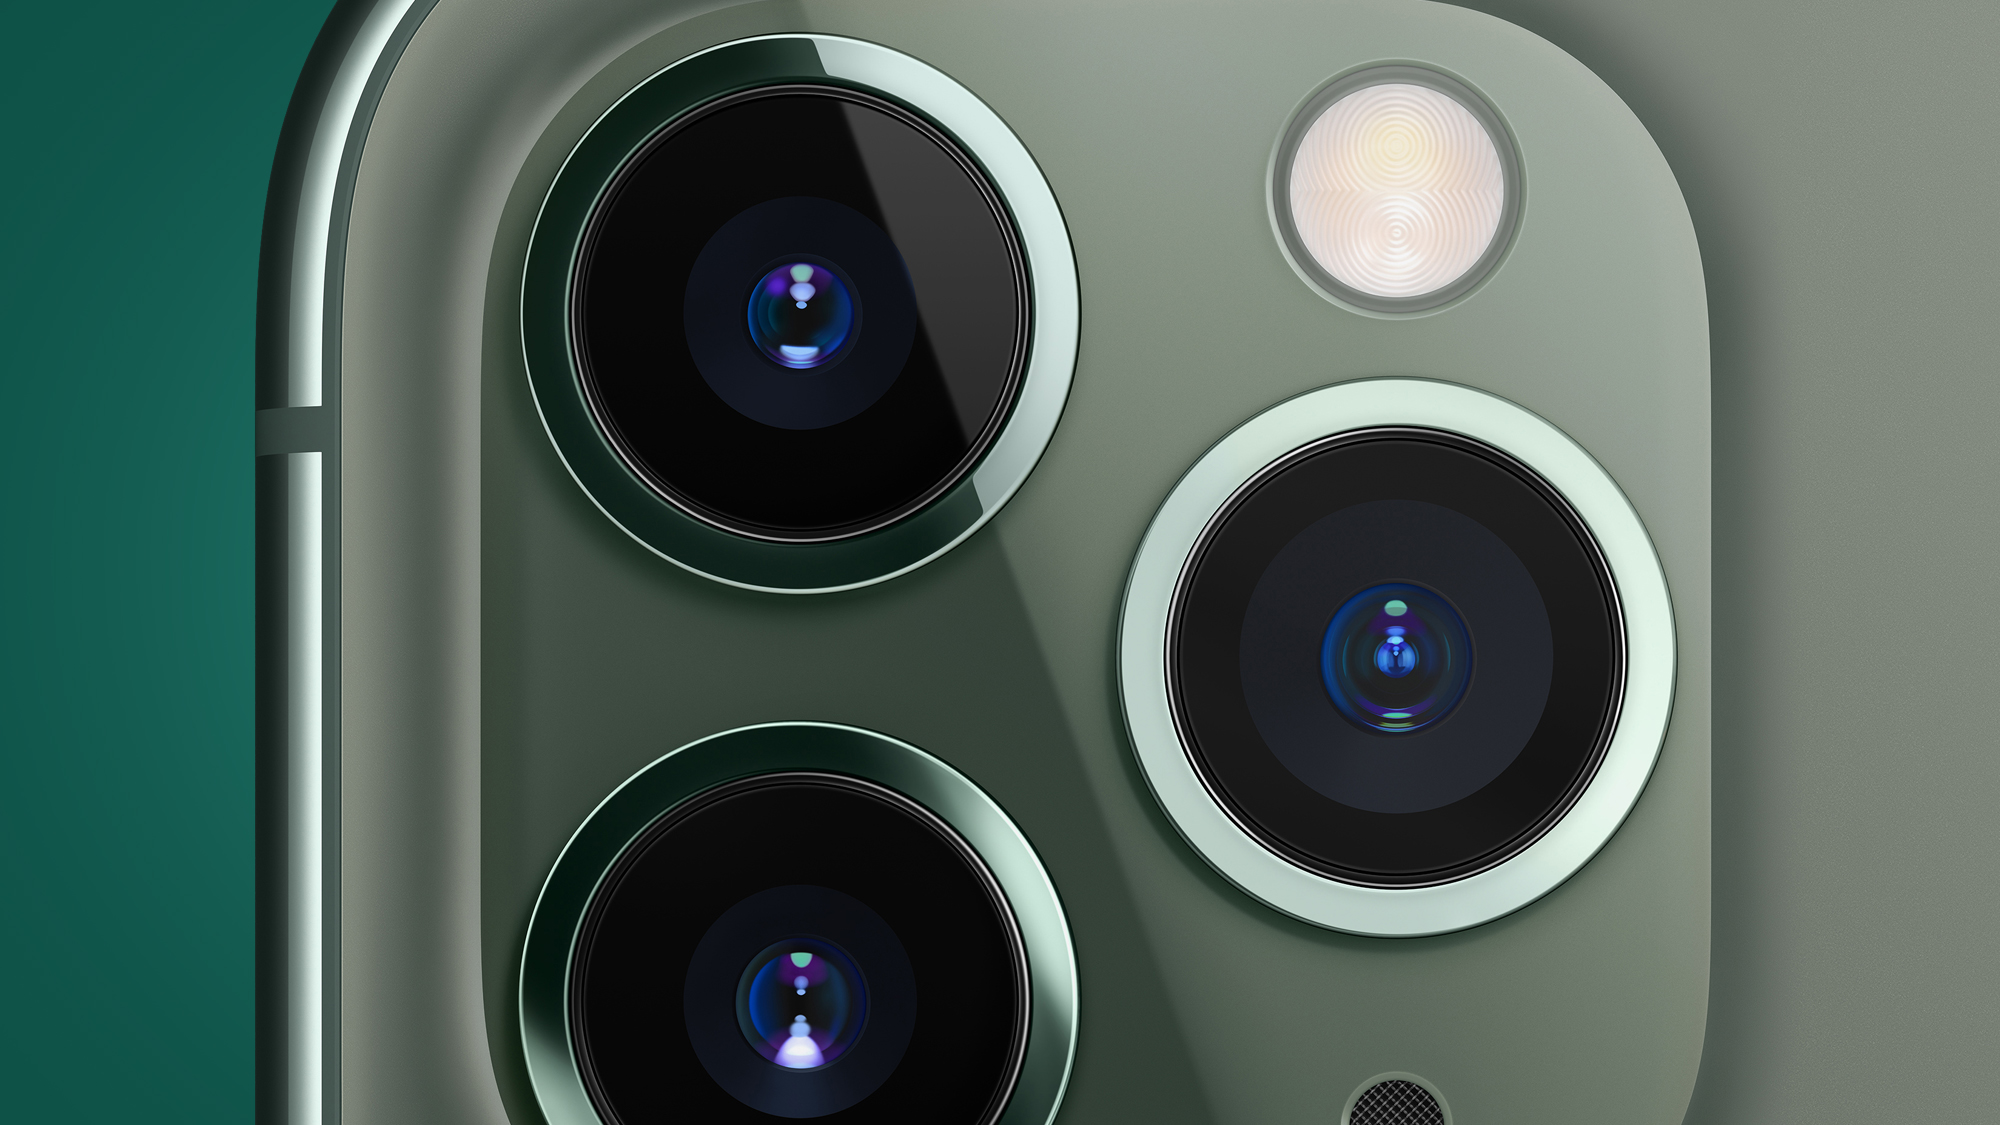 7 new features we want to see the iPhone 12 camera have